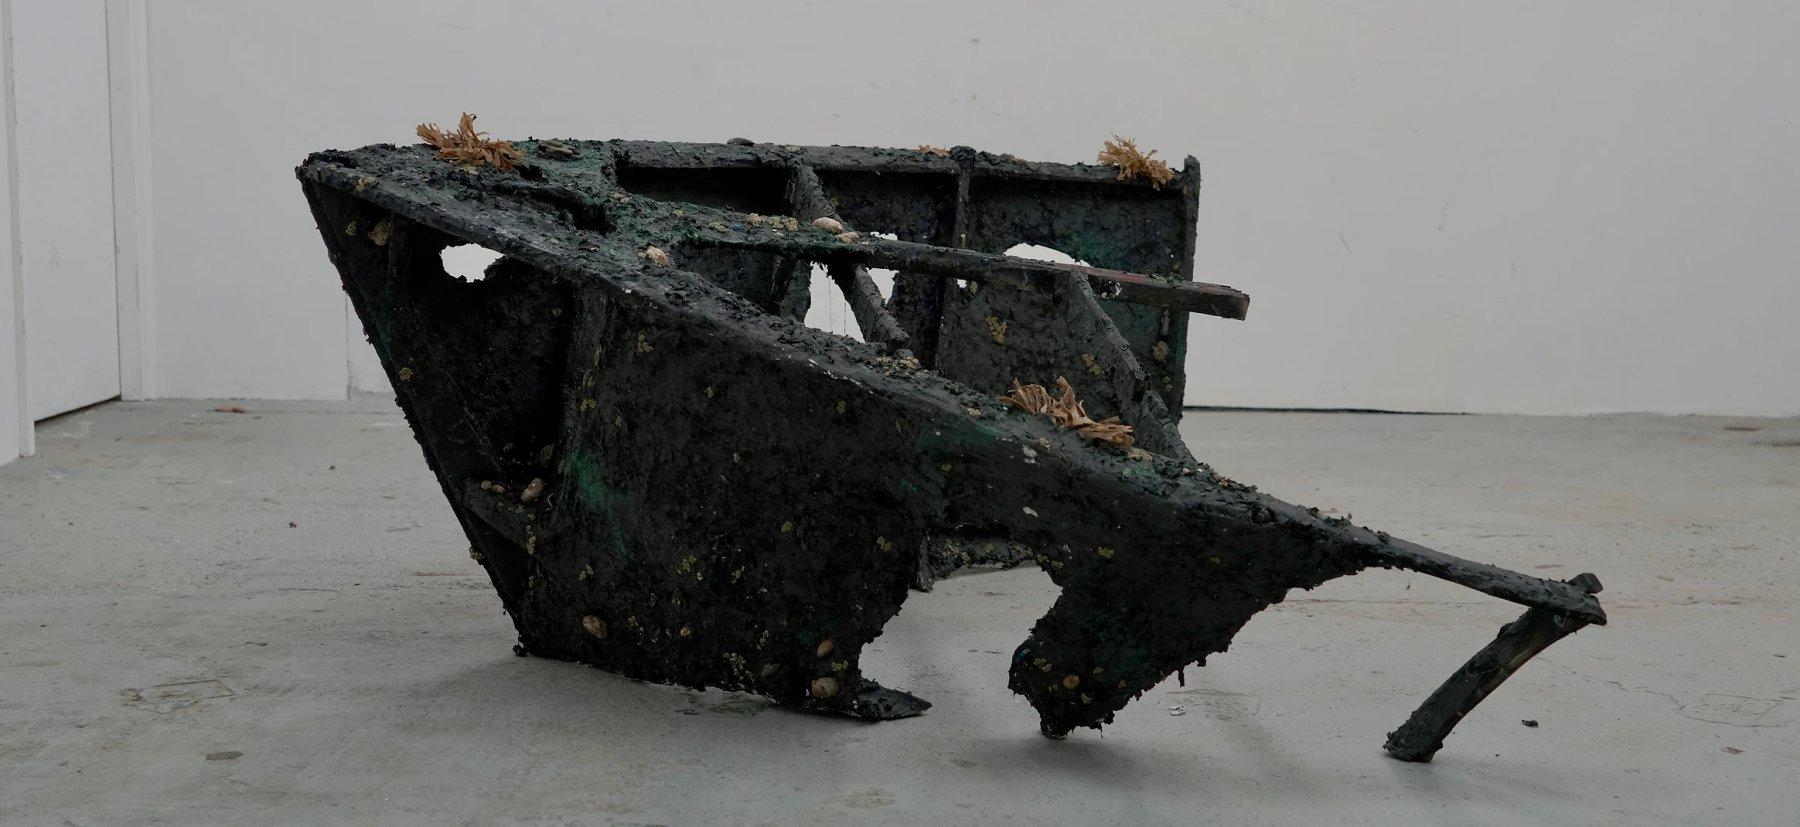 Stove By A Whale | Steven He, Seongeun Lee | Staffordshire St